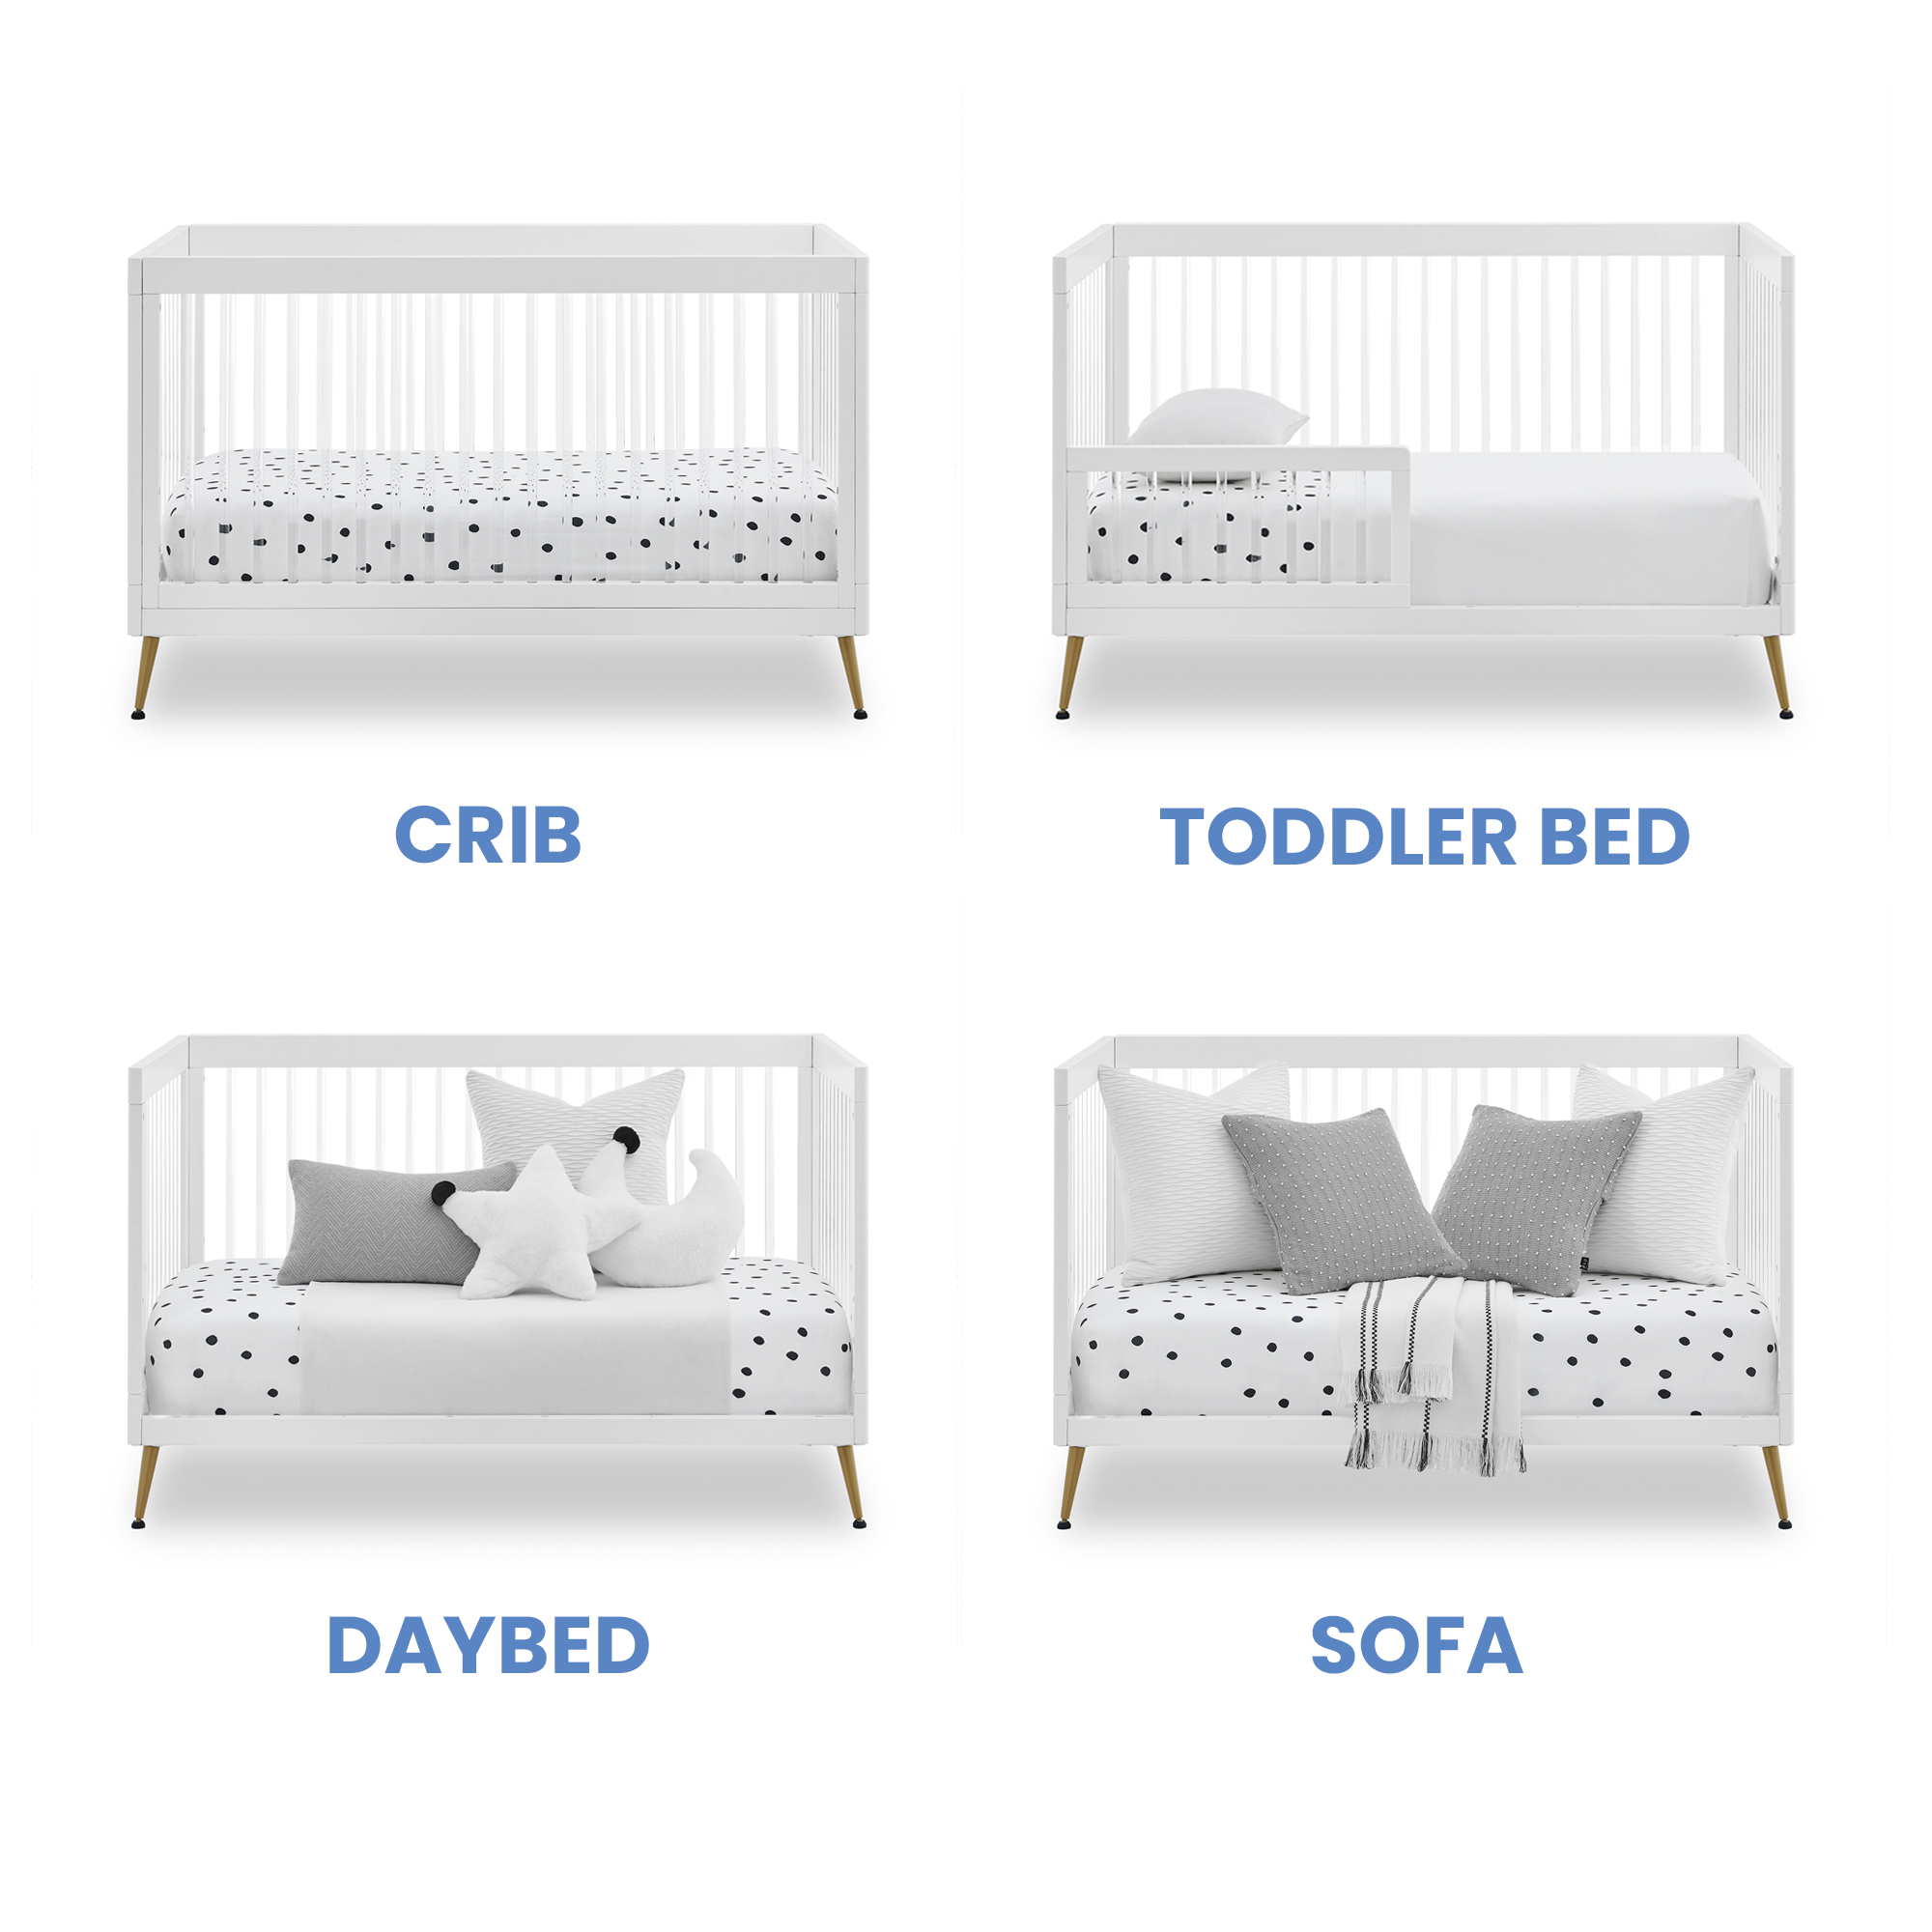 Delta Children Sloane Crib 7-Piece Baby Nursery Furniture Set–Includes: Convertible Crib, Dresser, Changing Top, Crib Mattress, Fitted Sheets, Toddler Guardrail & Changing Pad, White w/Melted Bronze - image 2 of 5